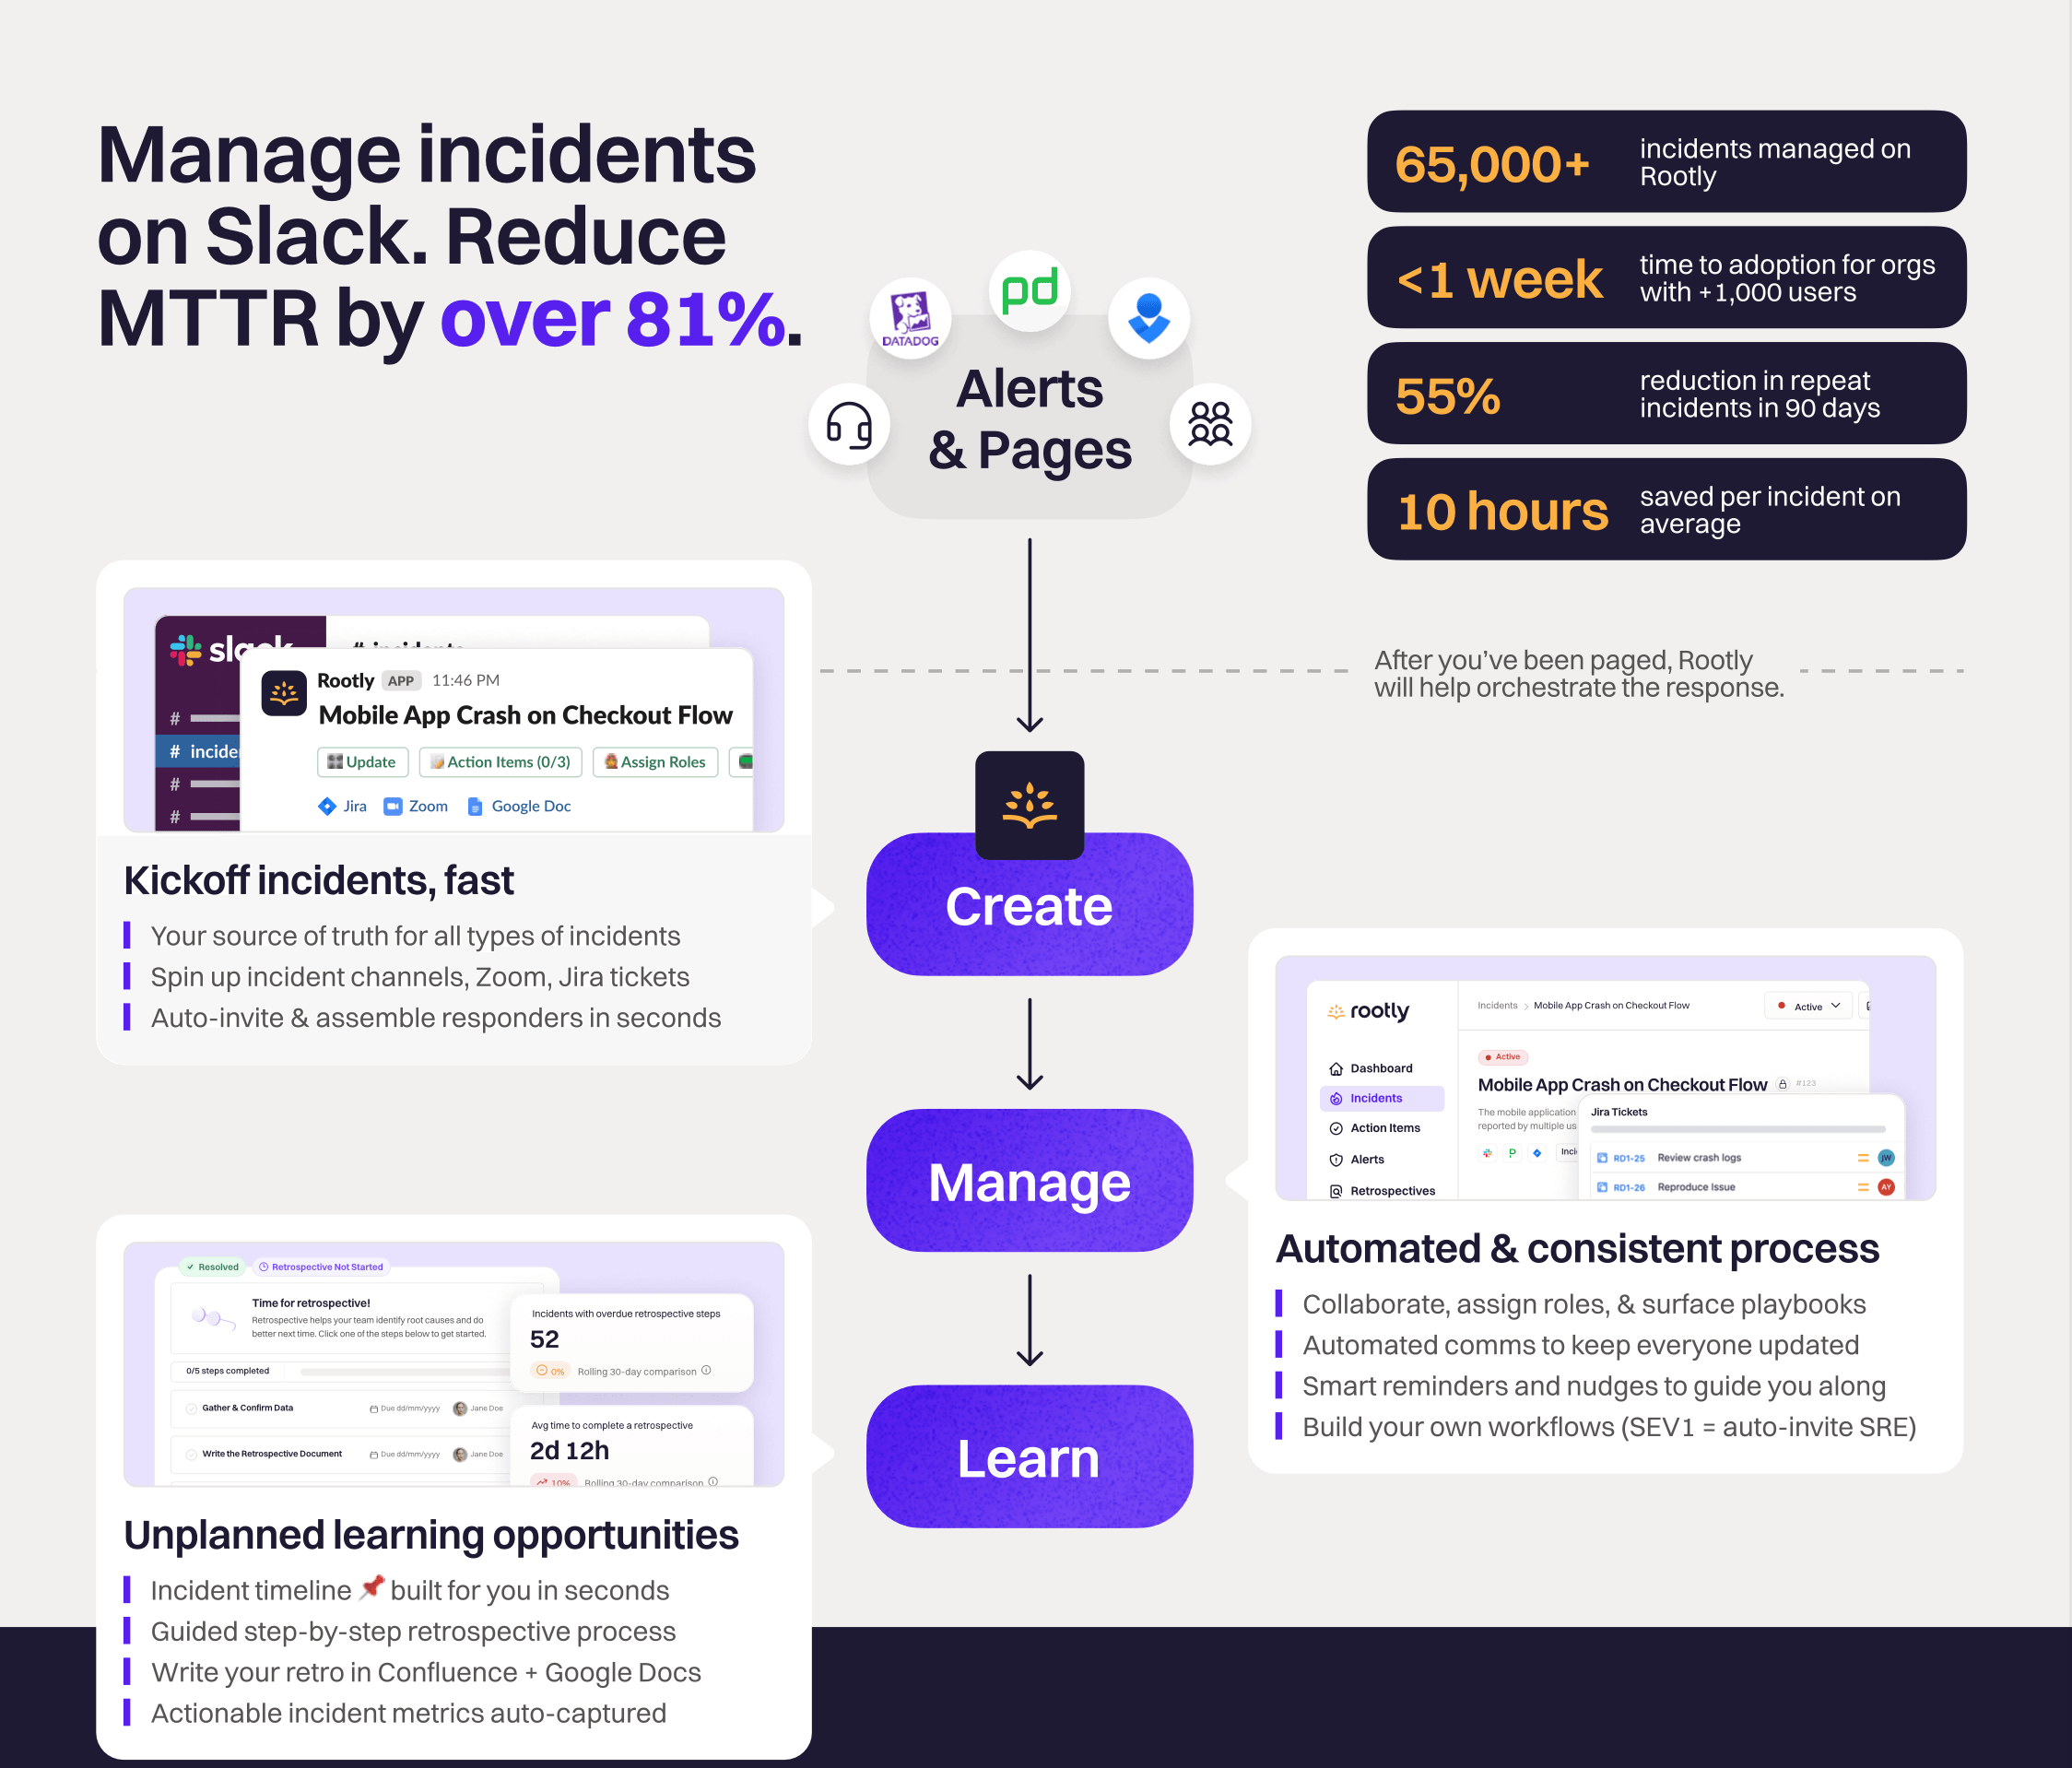 Rootly helps to kickoff incidents fast, makes your process automated & consistent, and helps you learn from incidents